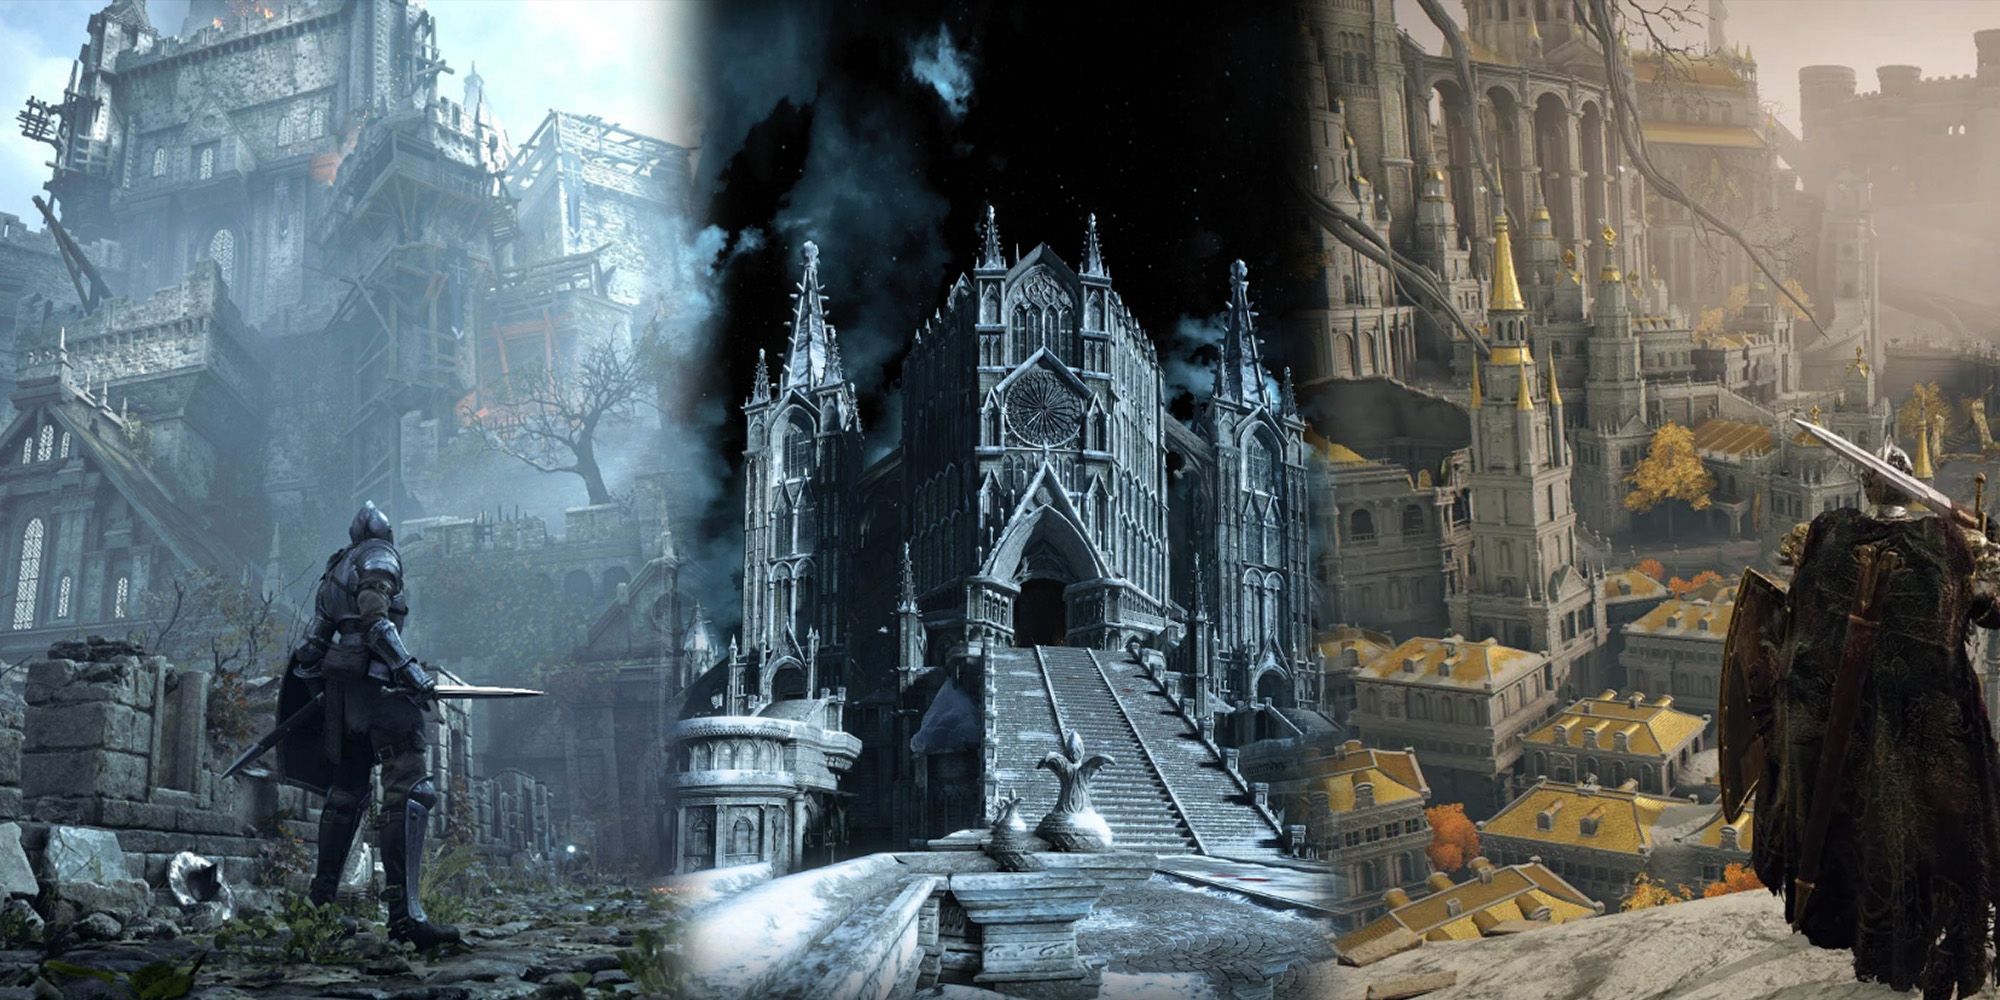 Elden Ring - Three Side By Side Images Of Bolataria, Anor Londo, and Leyndell